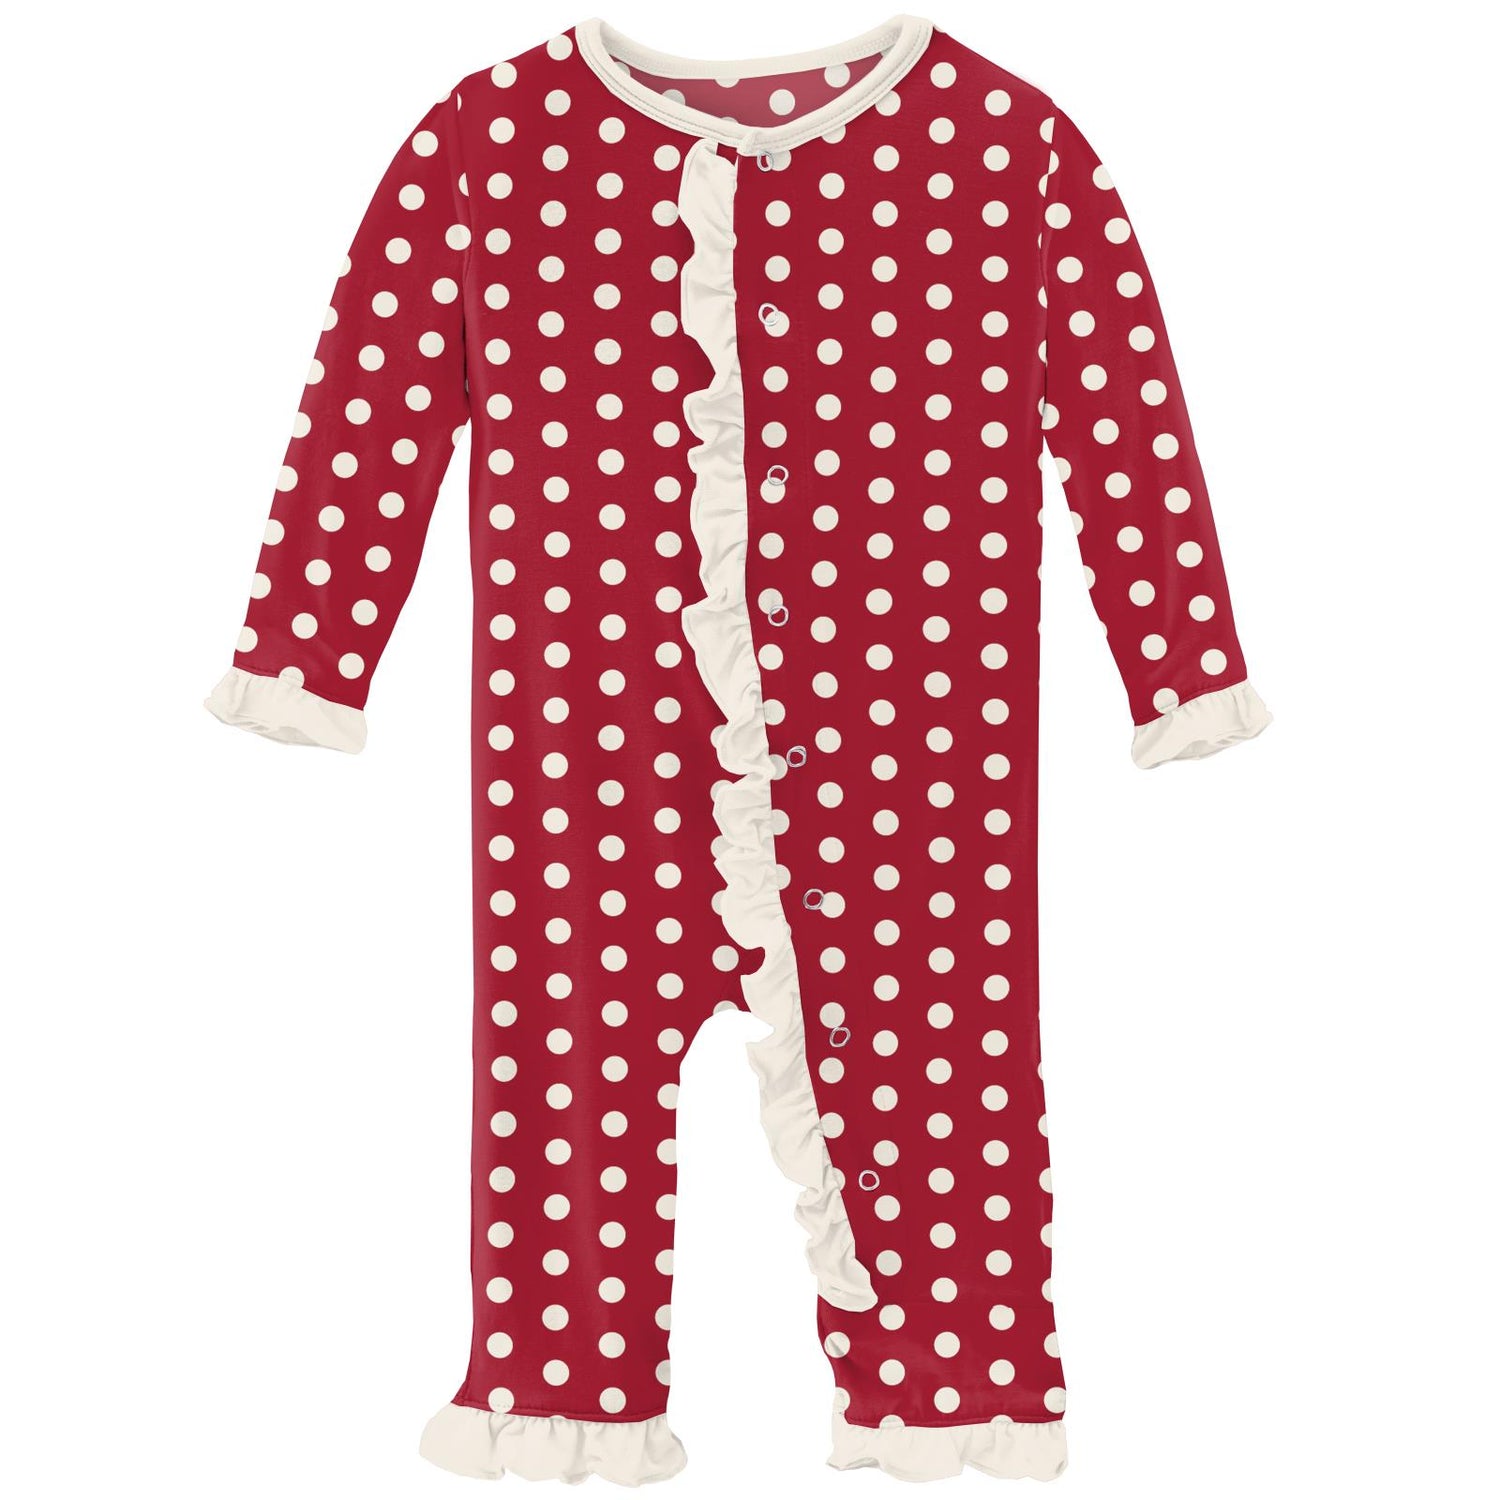 Print Classic Ruffle Coverall with Snaps in Candy Apple Polka Dots